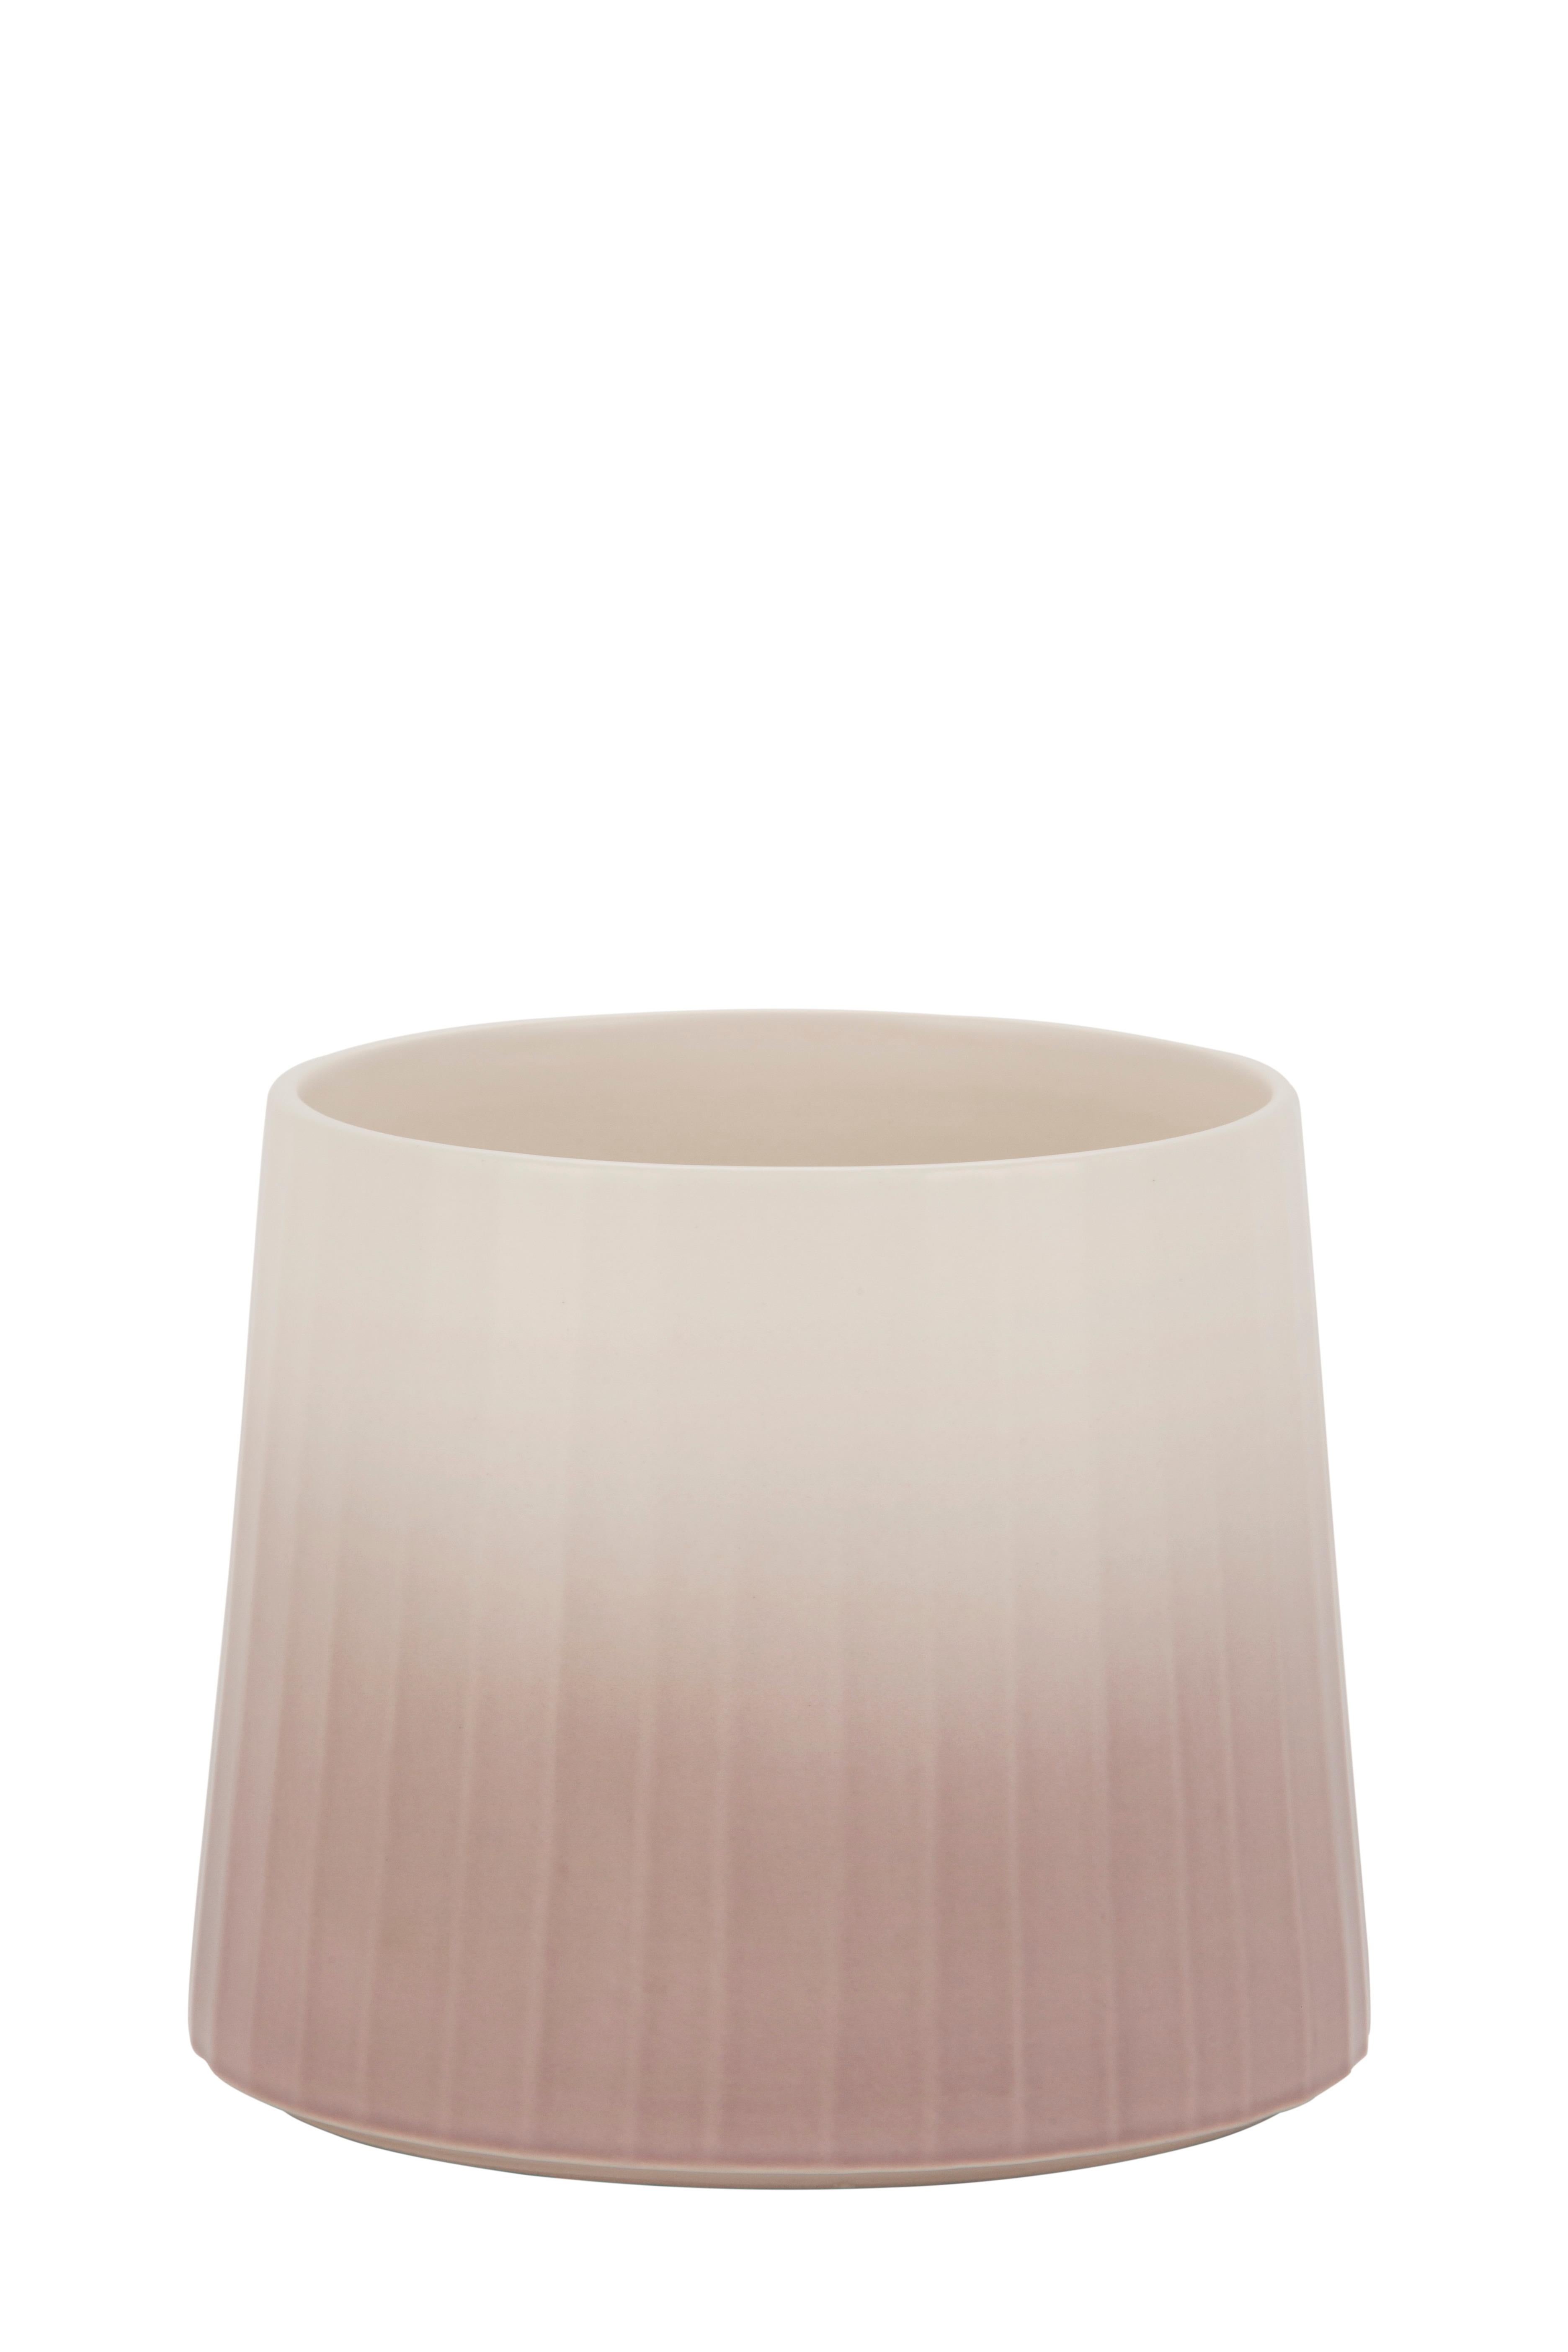 Modern Set/6 Ceramic Pots & Vases, White & Pink, Handmade in Portugal by Lusitanus Home For Sale